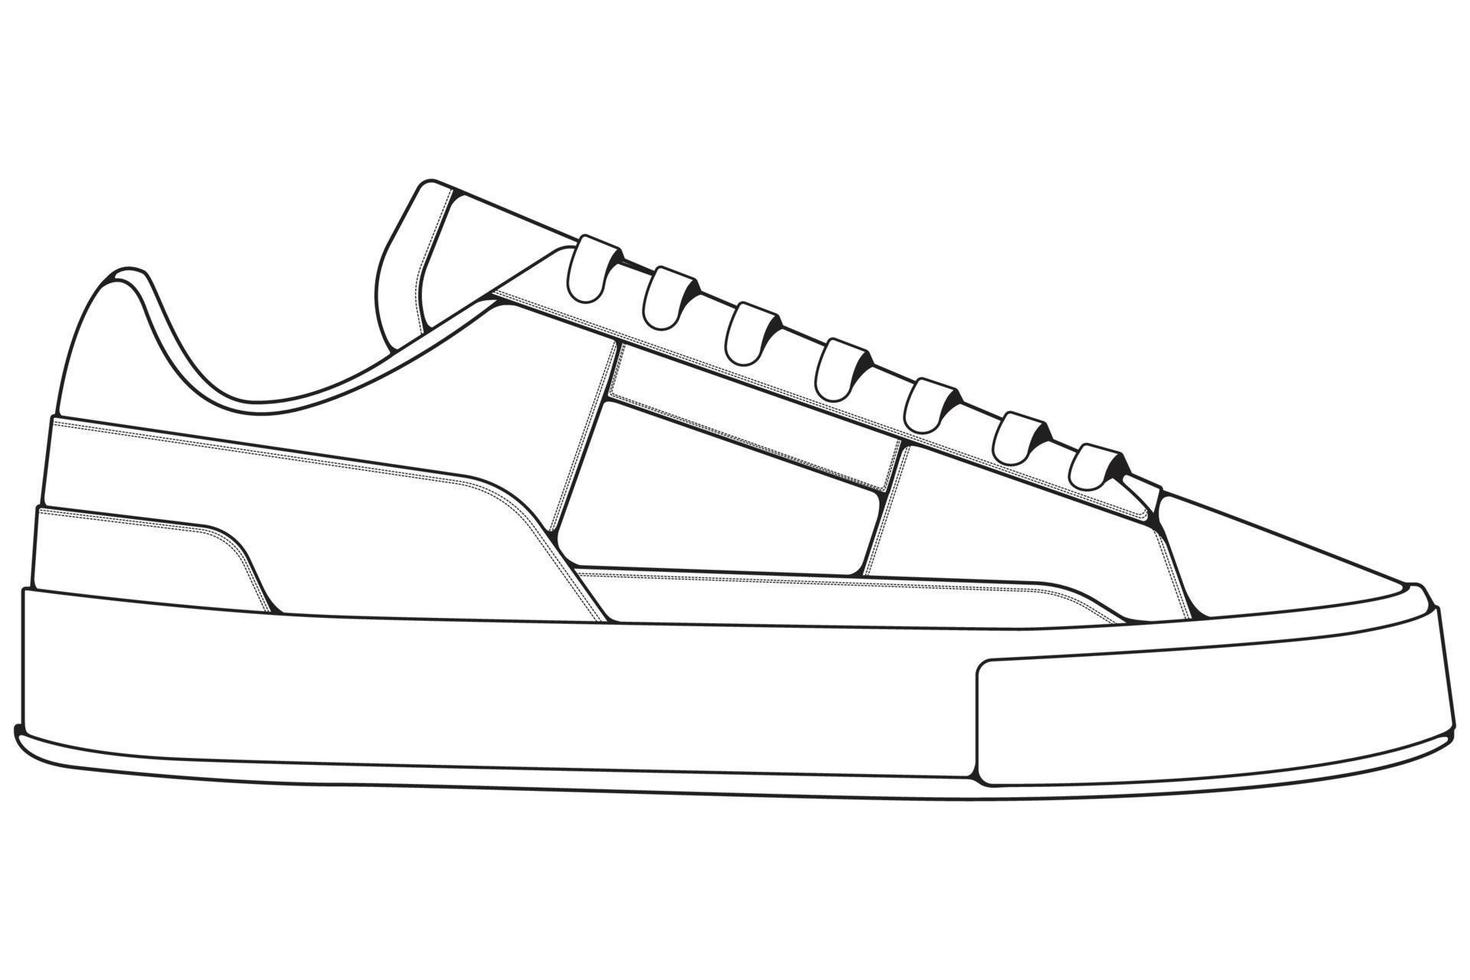 outline Cool Sneakers. Shoes sneaker outline drawing vector, Sneakers drawn in a sketch style. vector